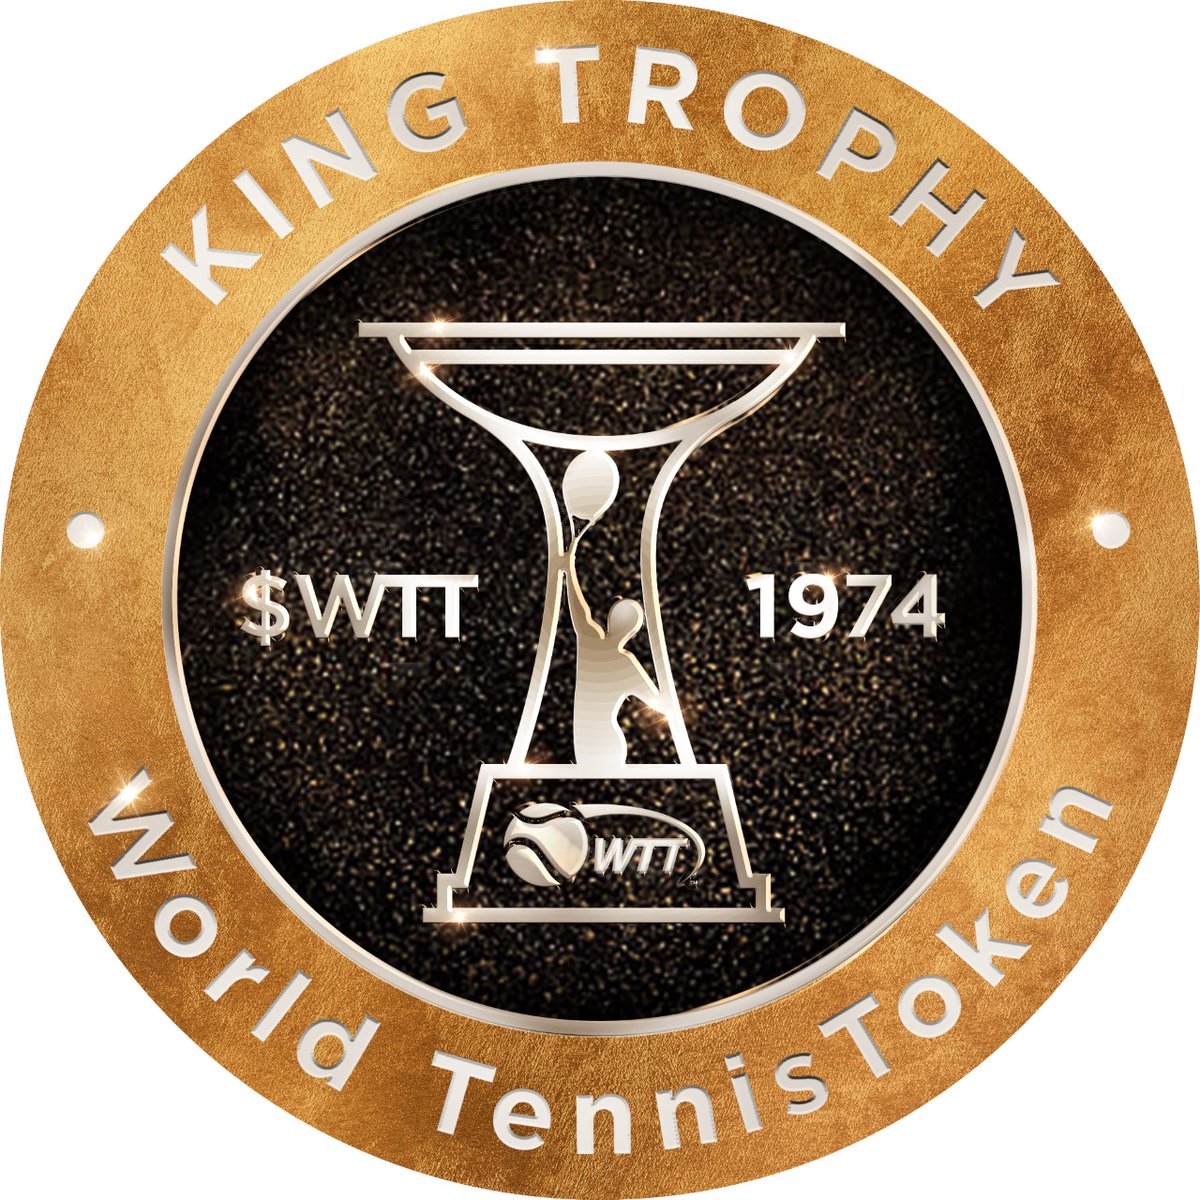 Last few hours to join the Afterparty and receive a gift of $WTT World TennisToken! Make sure to sign up here before 10 AM PT: ob93nz1y6a7.typeform.com/wttafterparty